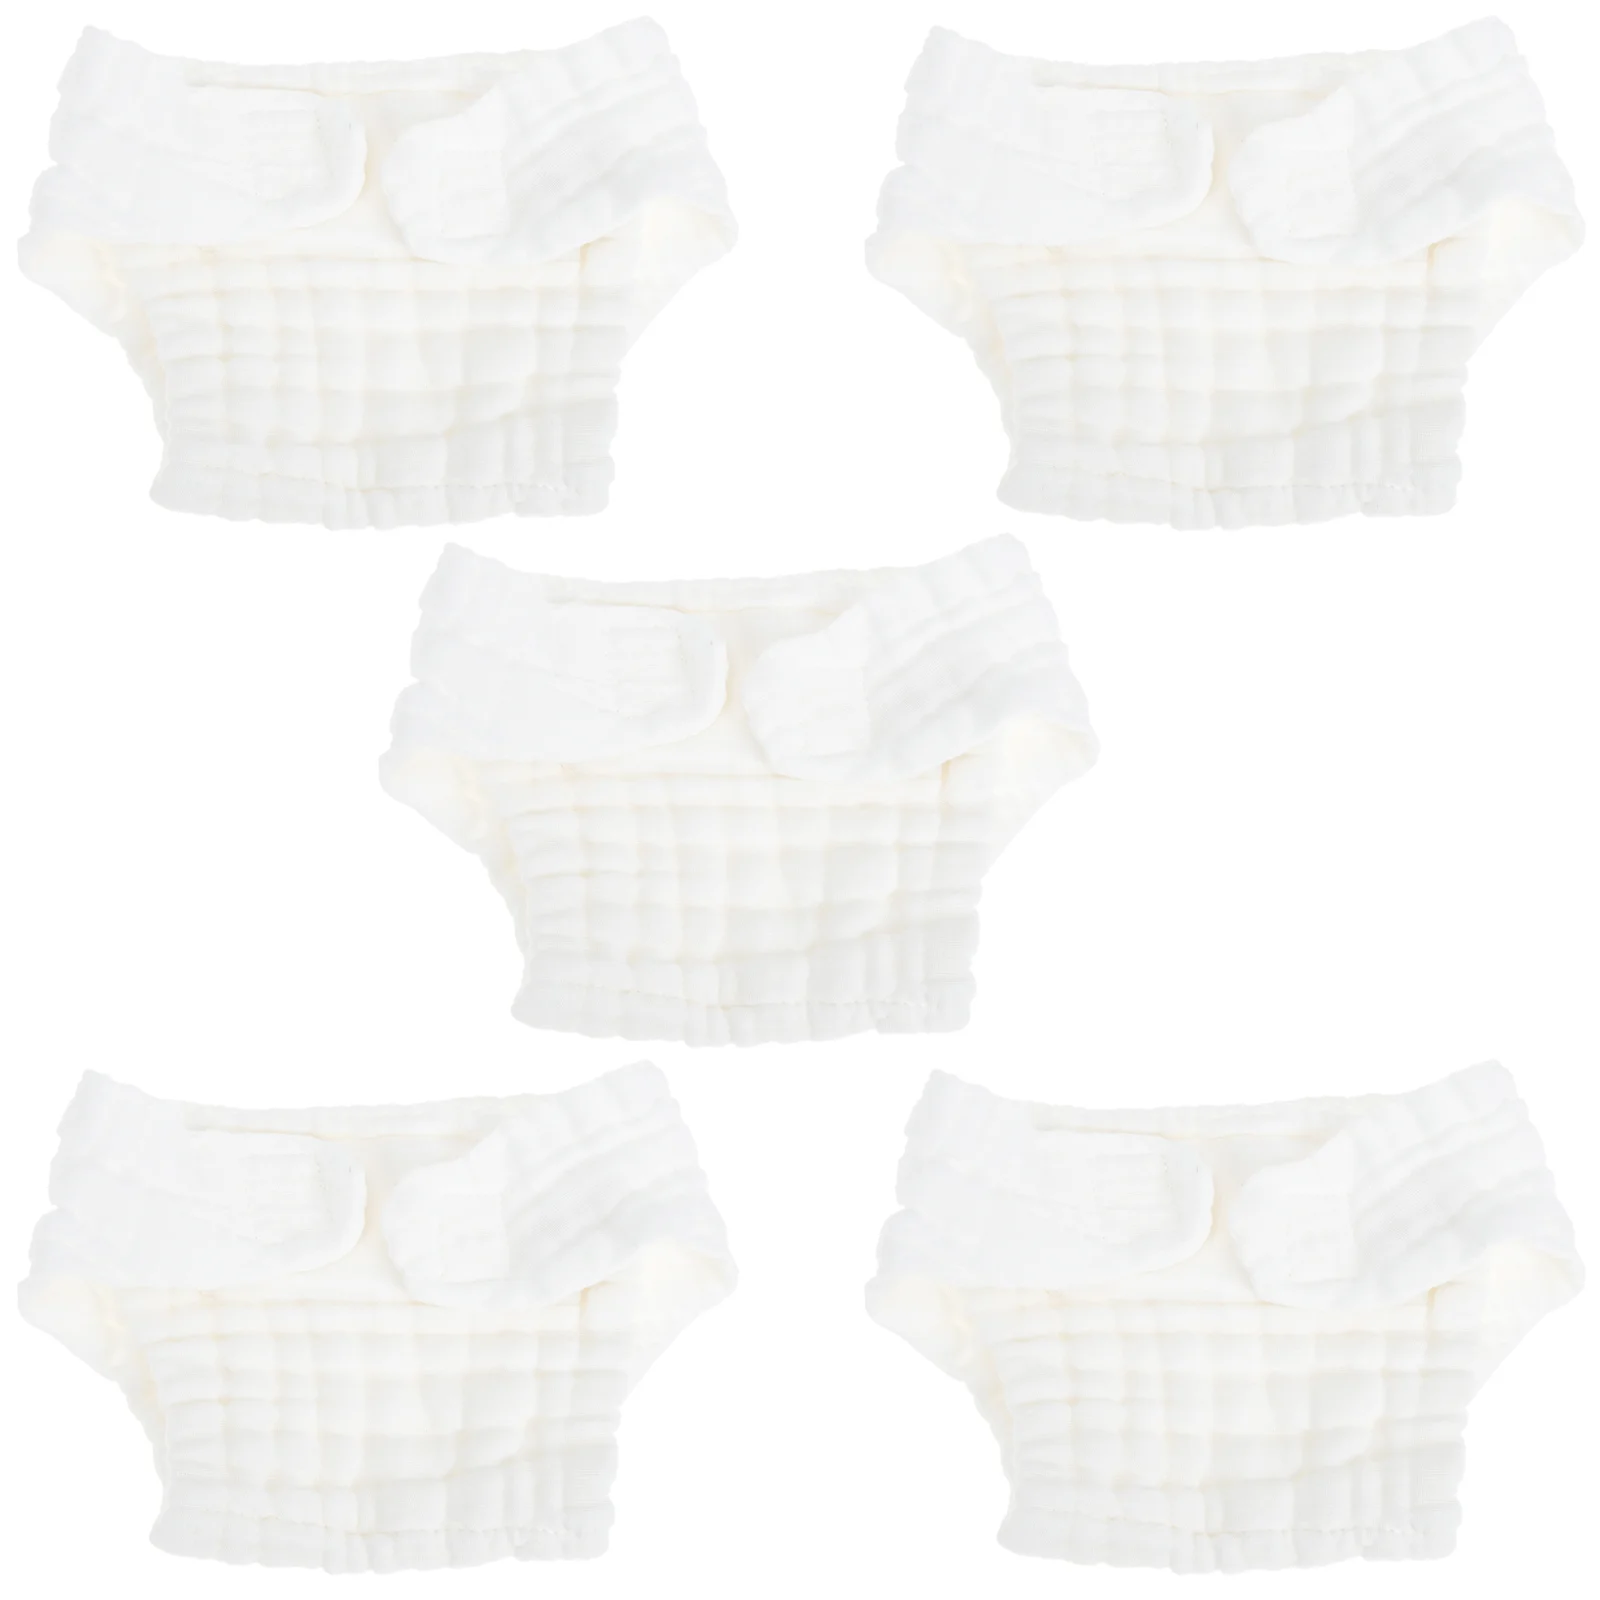 

5 Pcs New Born Diapers Baby Newborn Cloth Reusable Pants White Washable Toddler Disposable for Mother kids